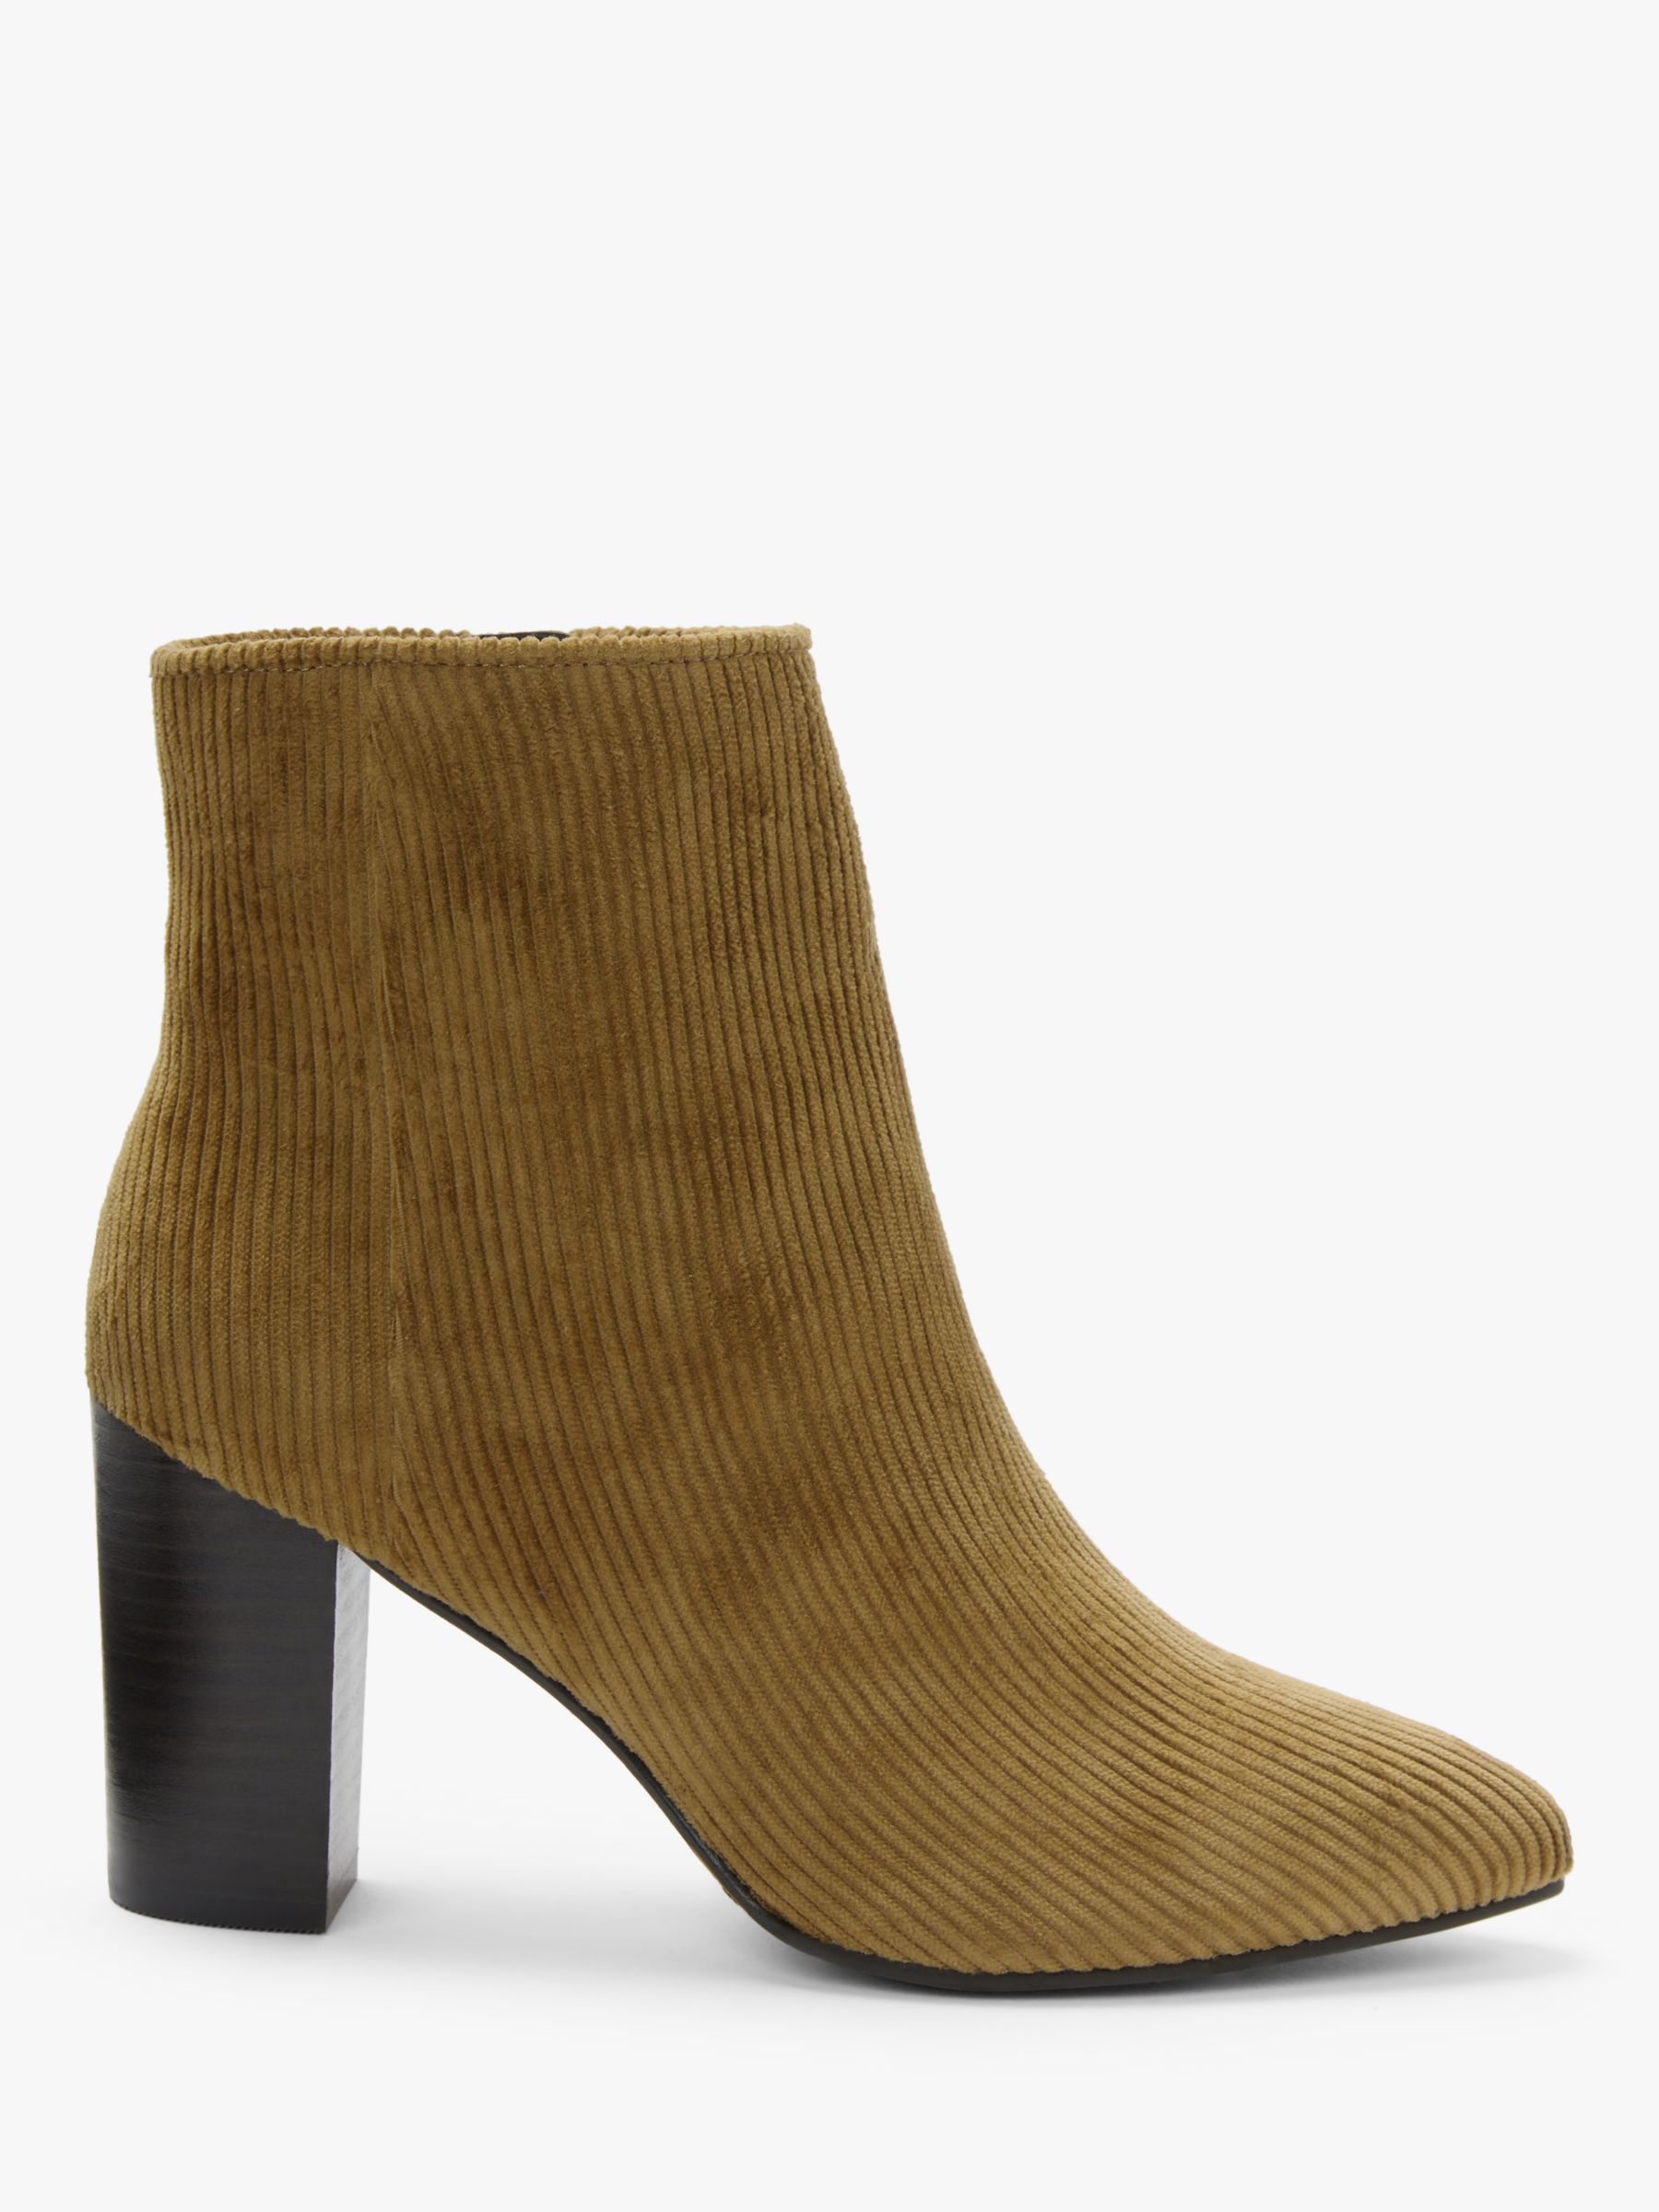 Boden Langley High Block Heel Ankle Boots, Gingerbread